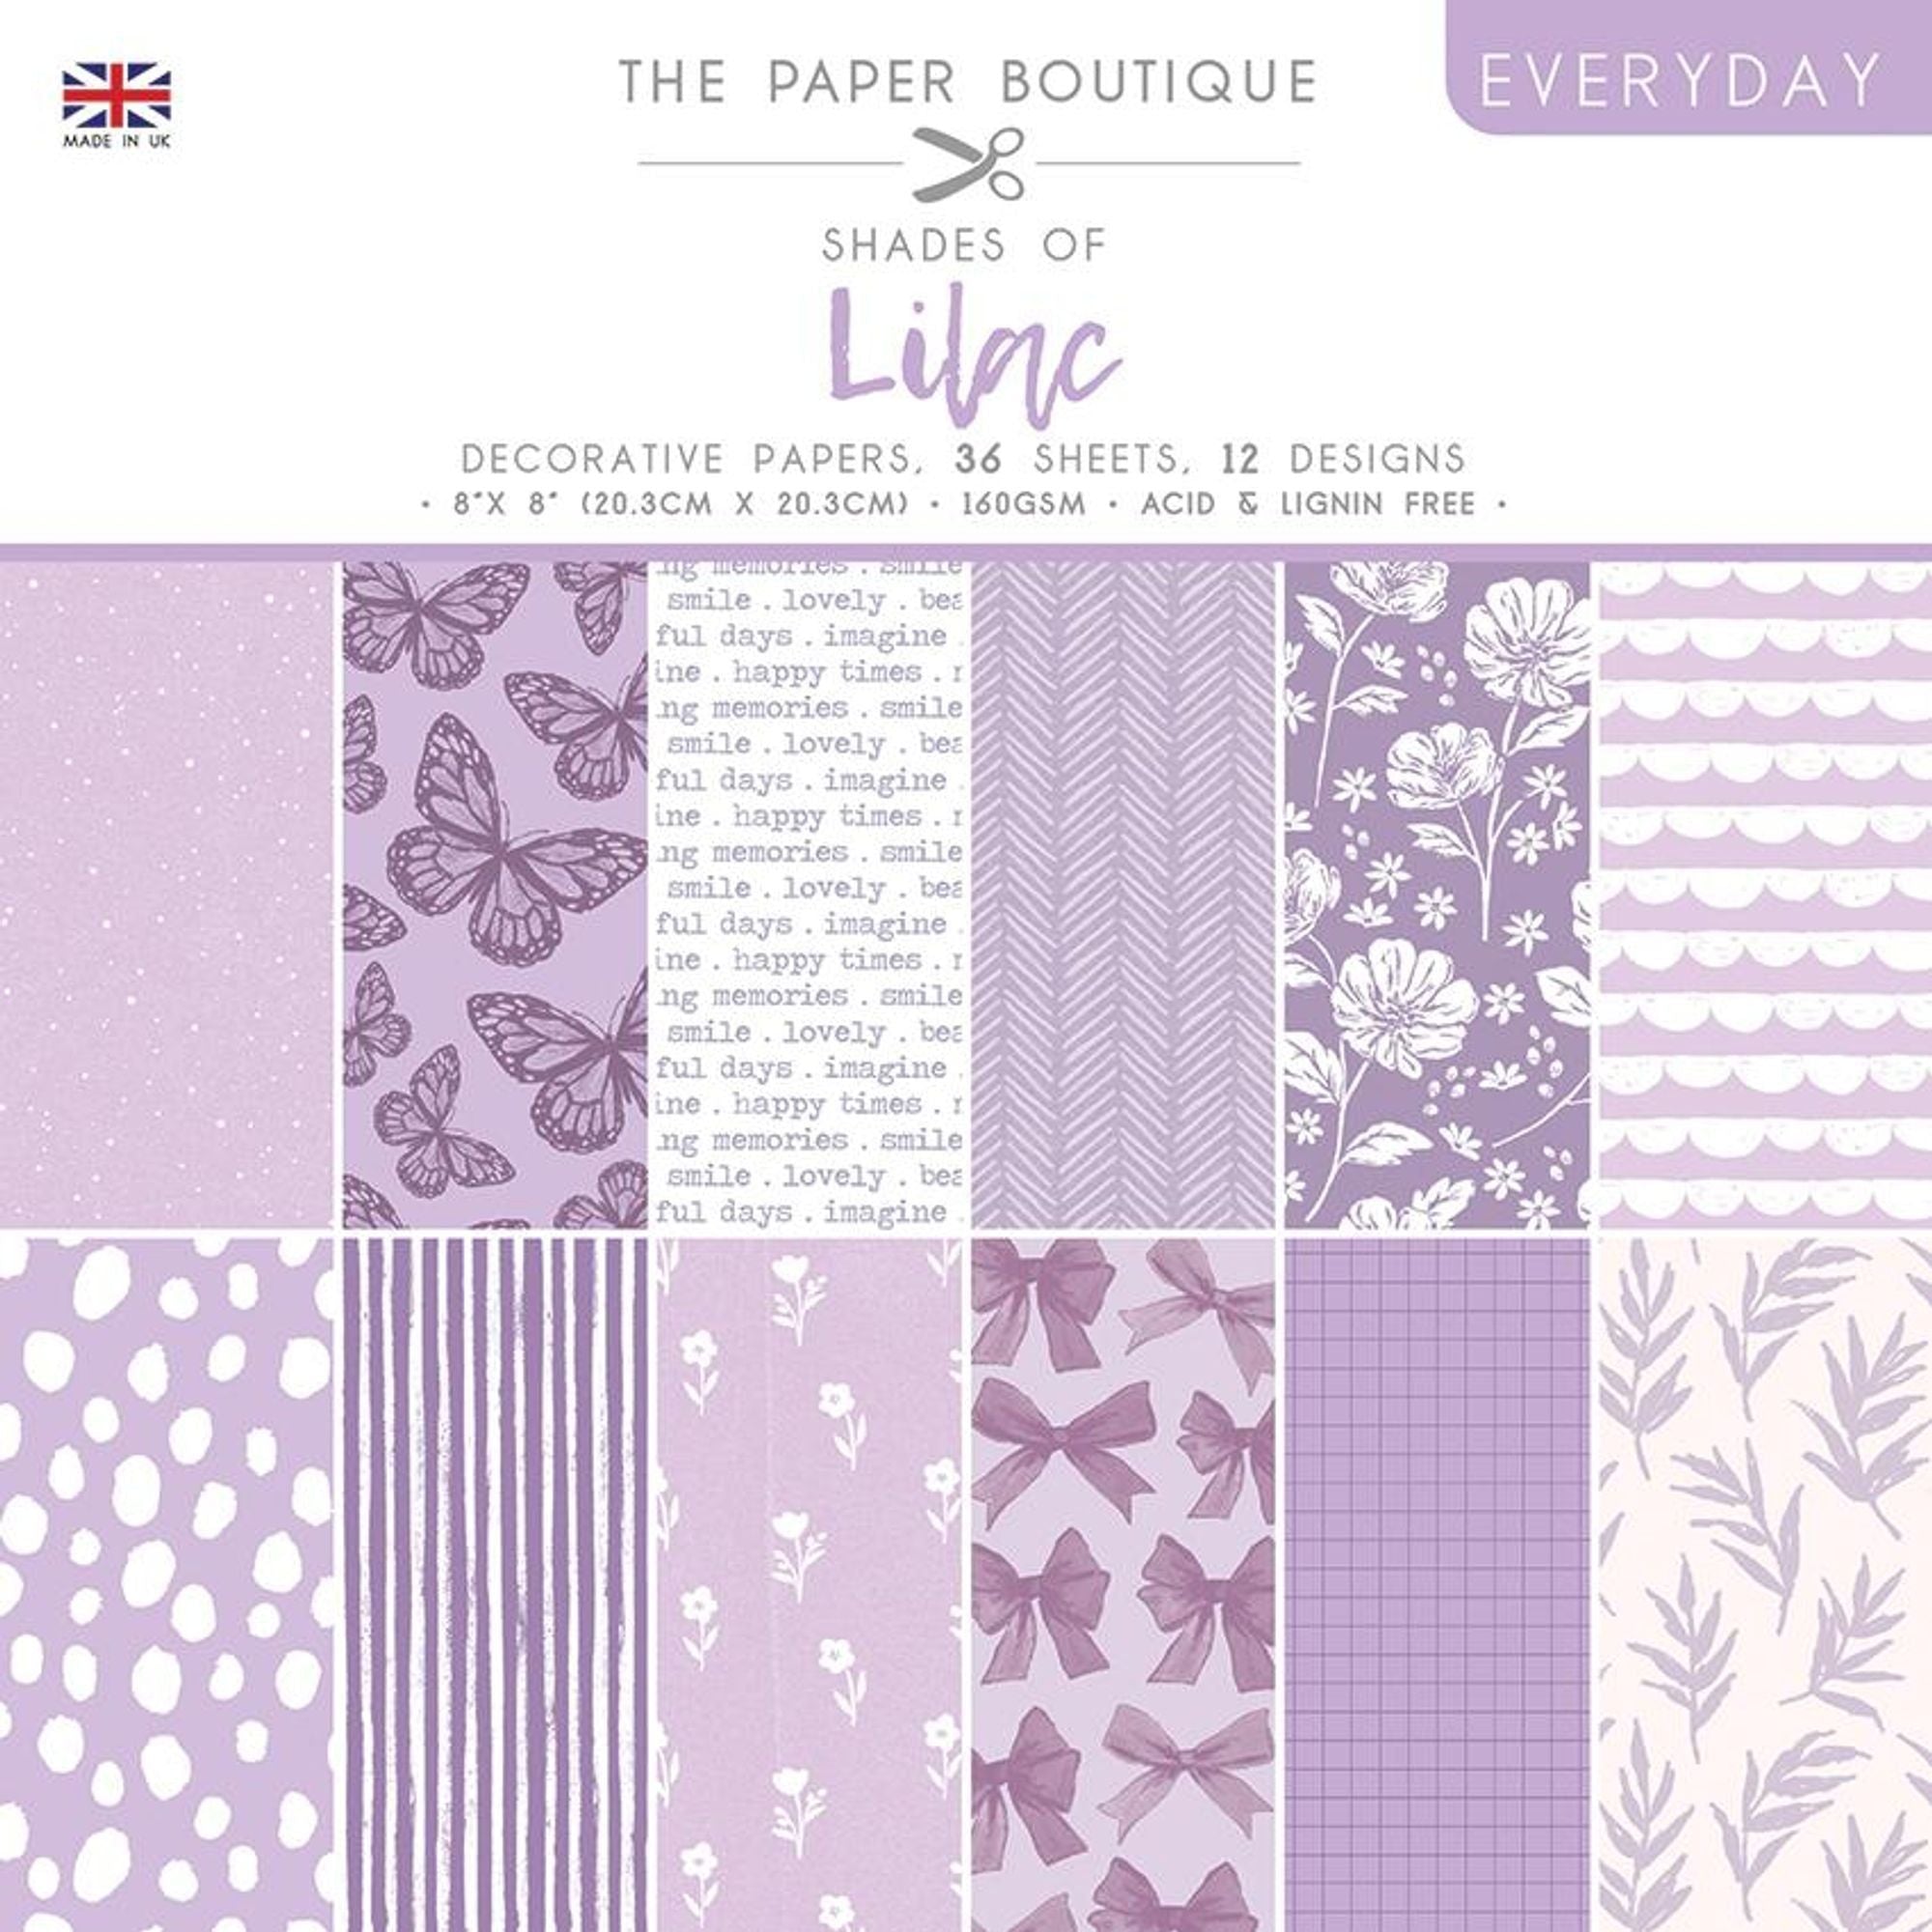 The Paper Boutique Everyday - Shades Of - Lilac 8 in x 8 in Pad